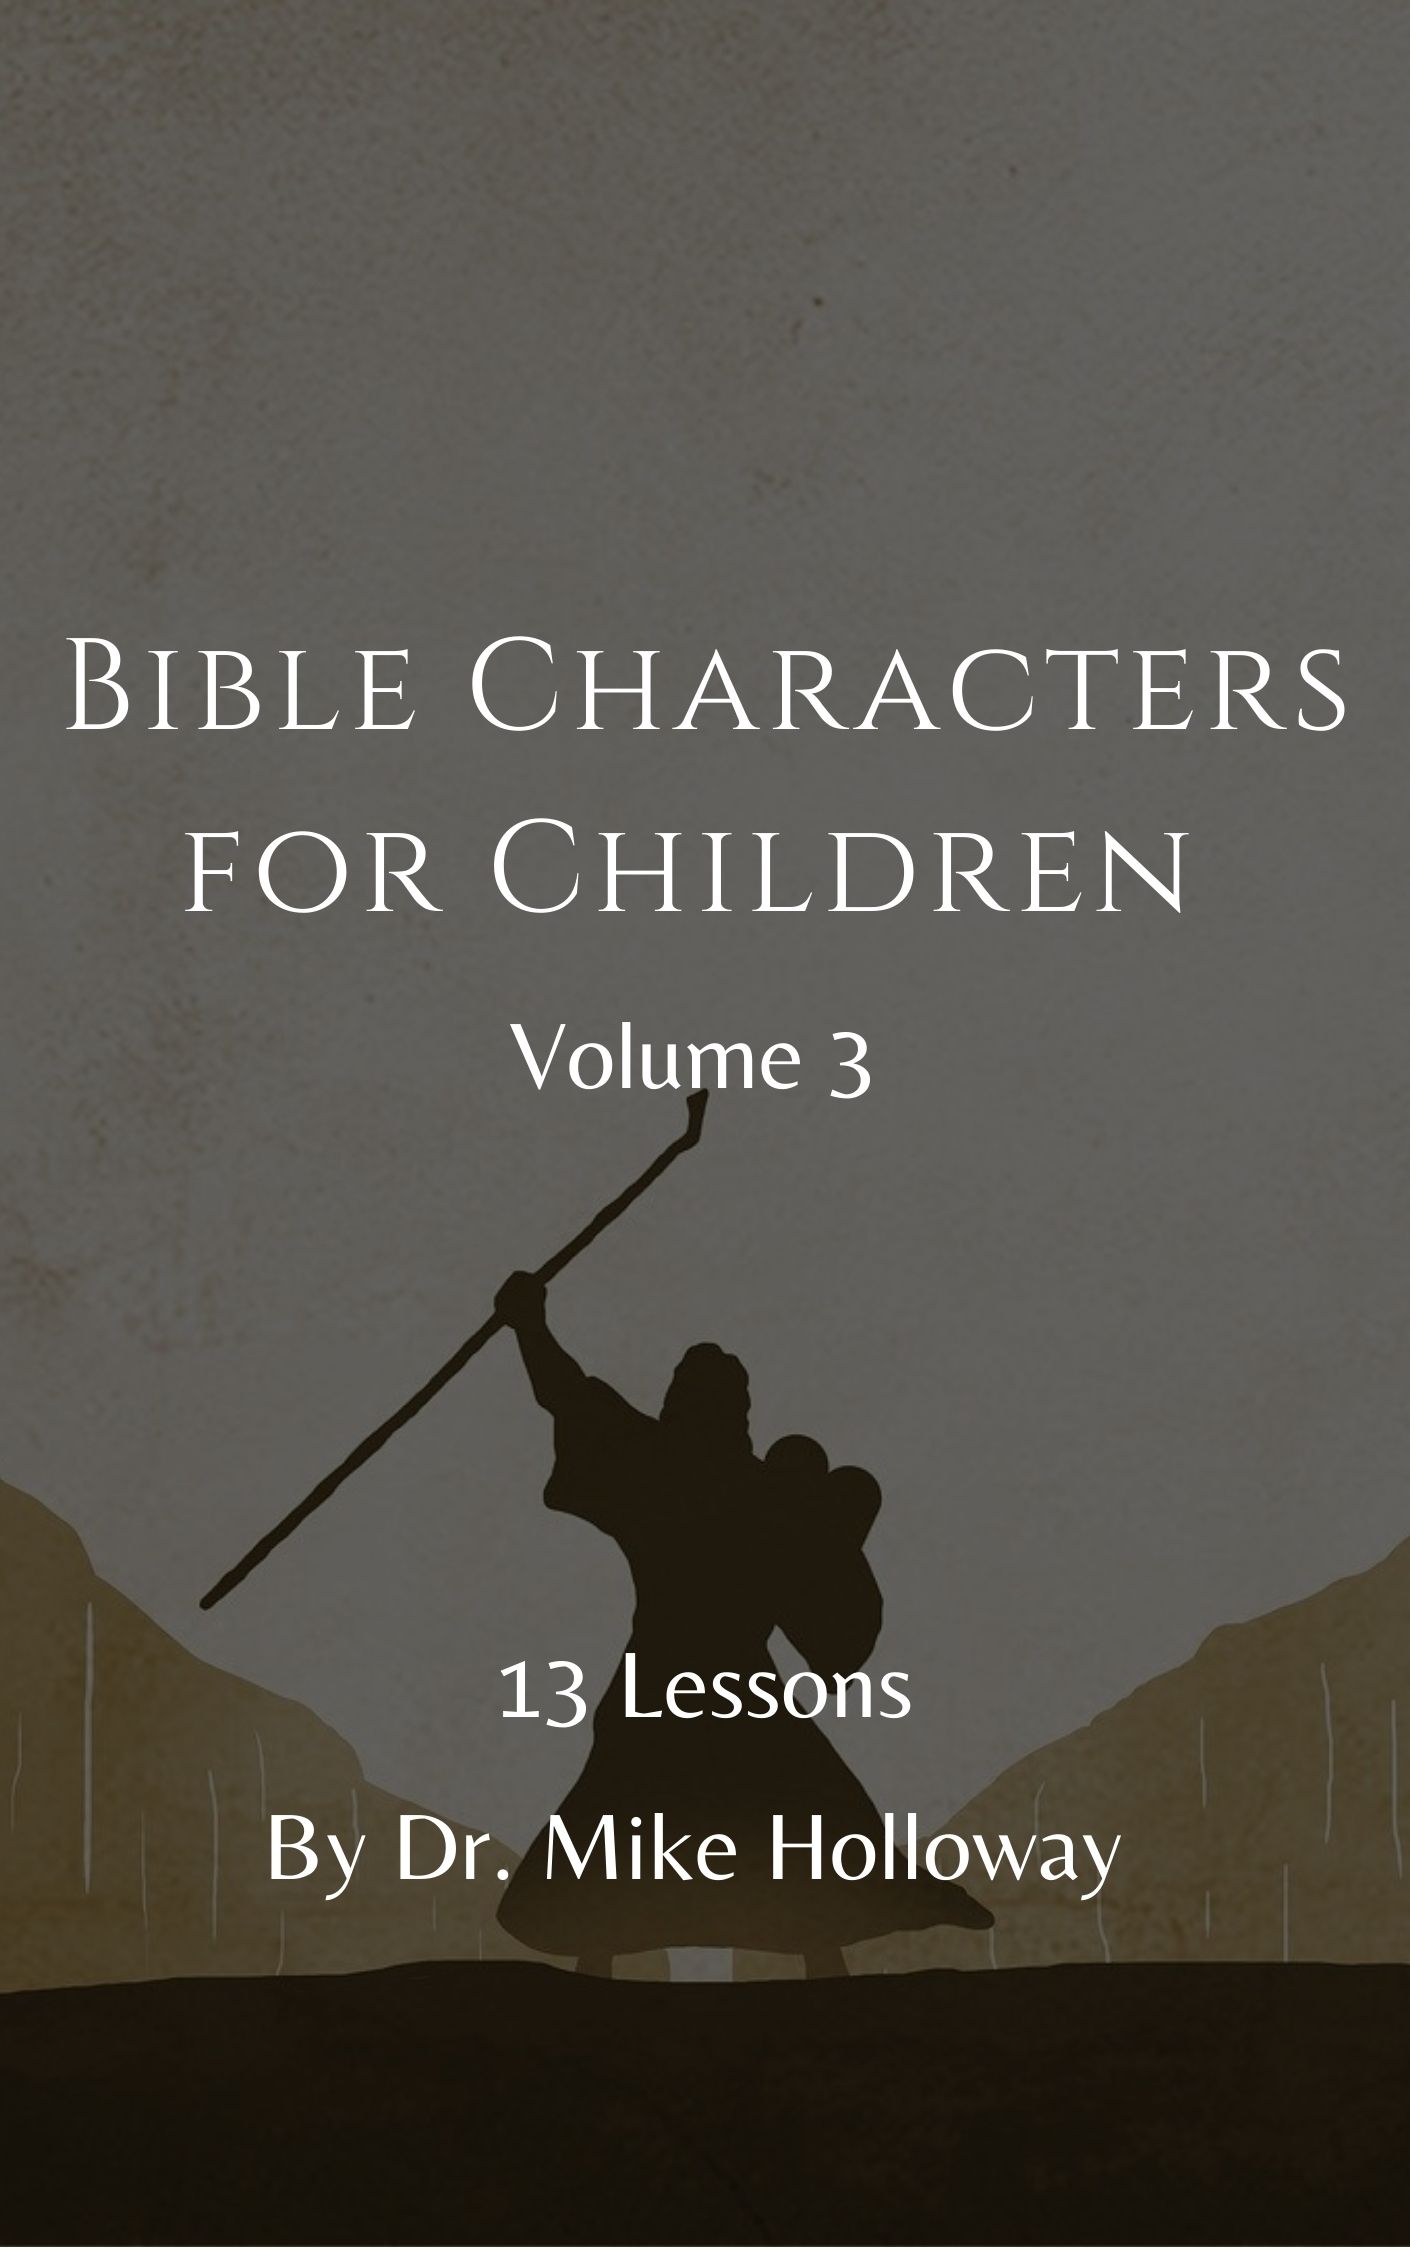 Bible Characters for Children – Volume 3